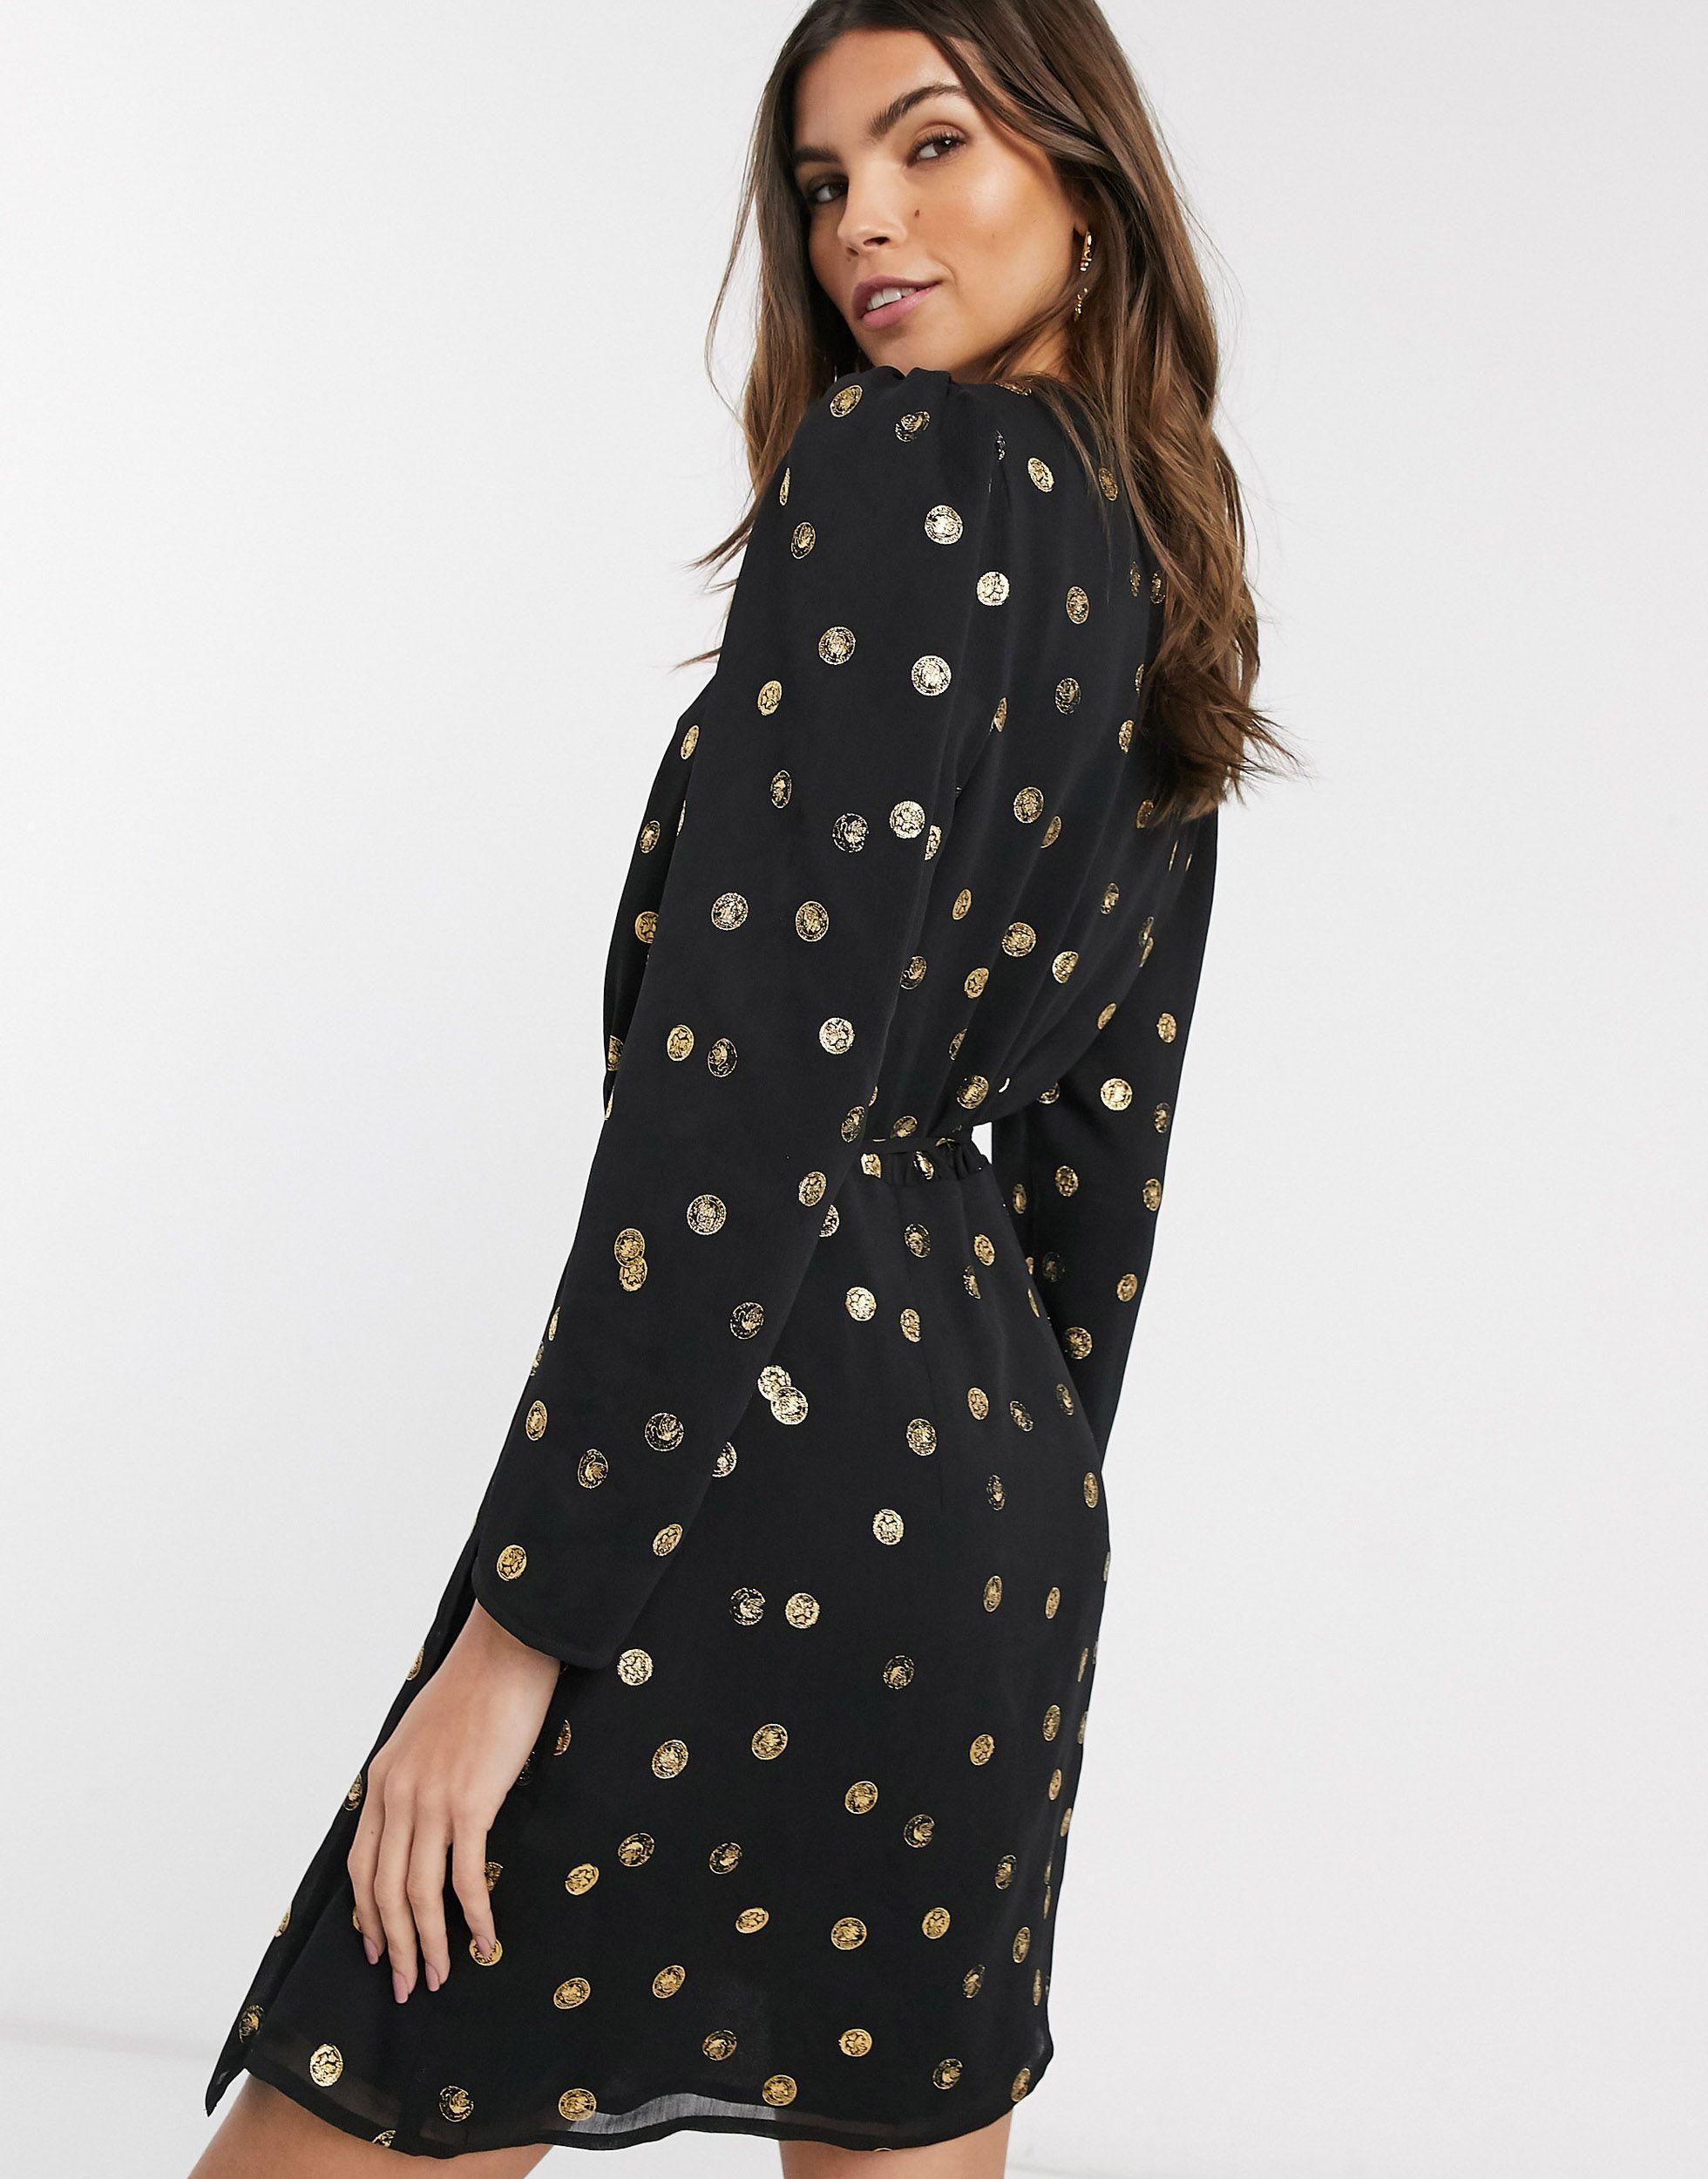 Other Stories Mini Wrap Dress in Black ...